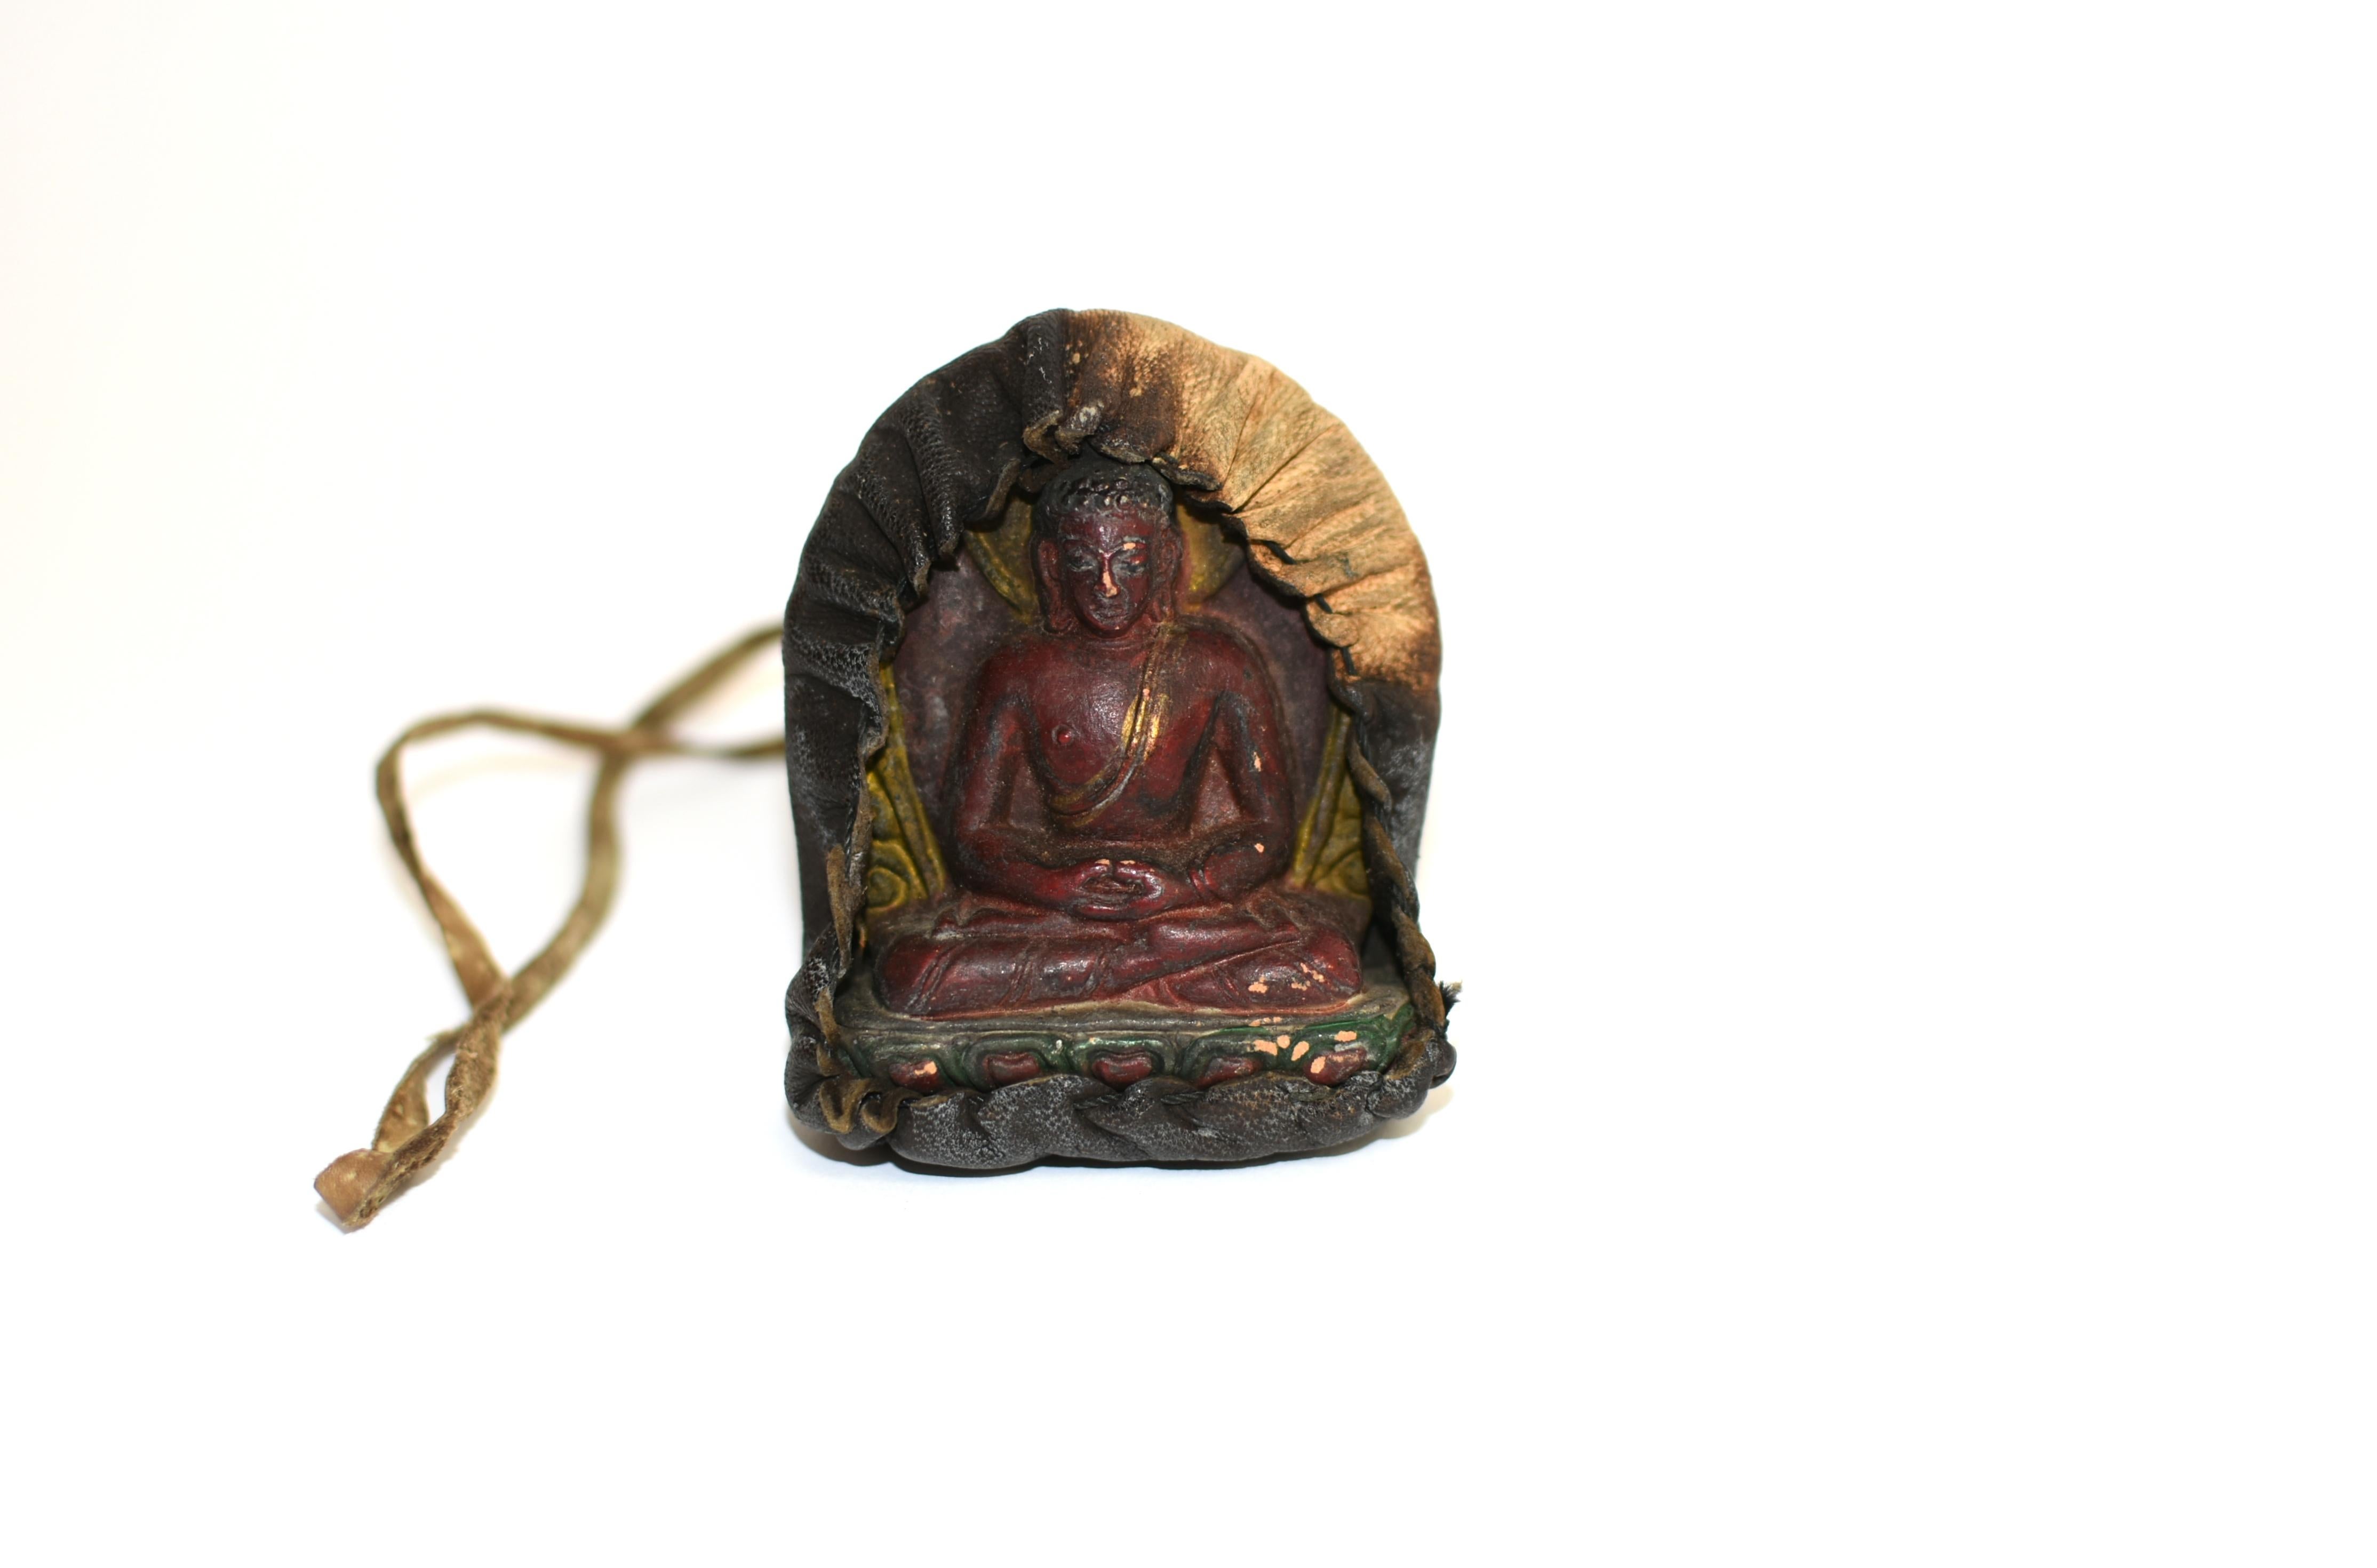 A Tibetan amulet featuring Buddha Shakyamuni encased in a hand stitched leather shrine. Seated dhyana asana on a lotus throne, with downcast eyes flanked by long earlobes under neatly coiled hair. He wears a robe that leaves his right chest bare and